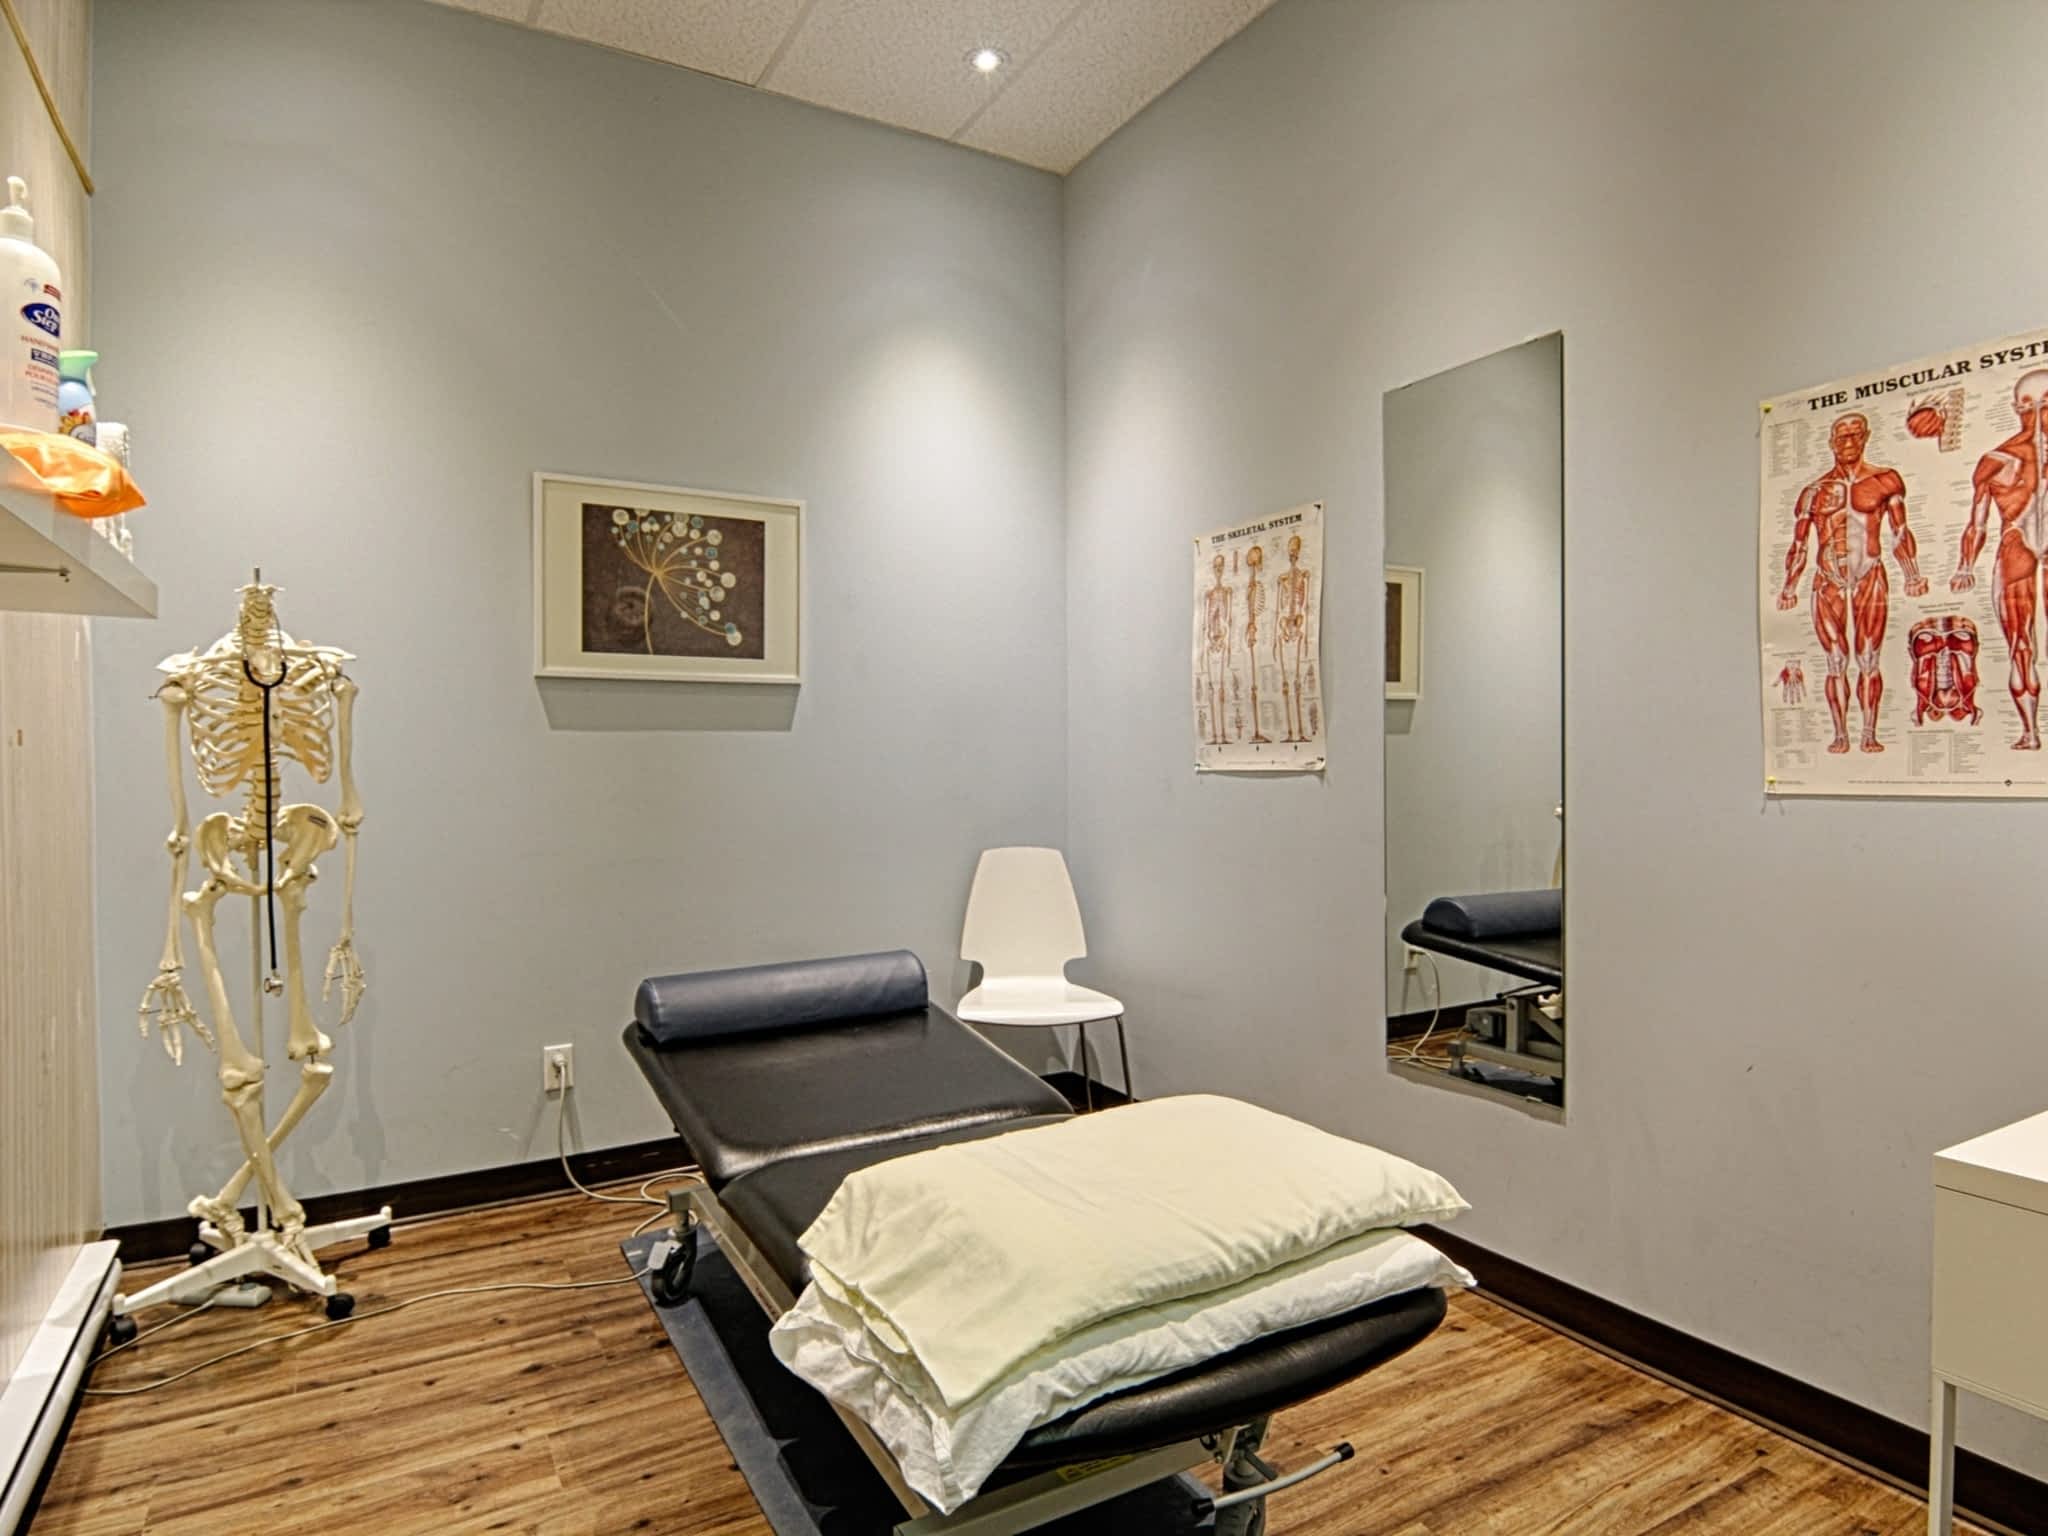 photo Cappino Physiotherapy And WellnessCenter